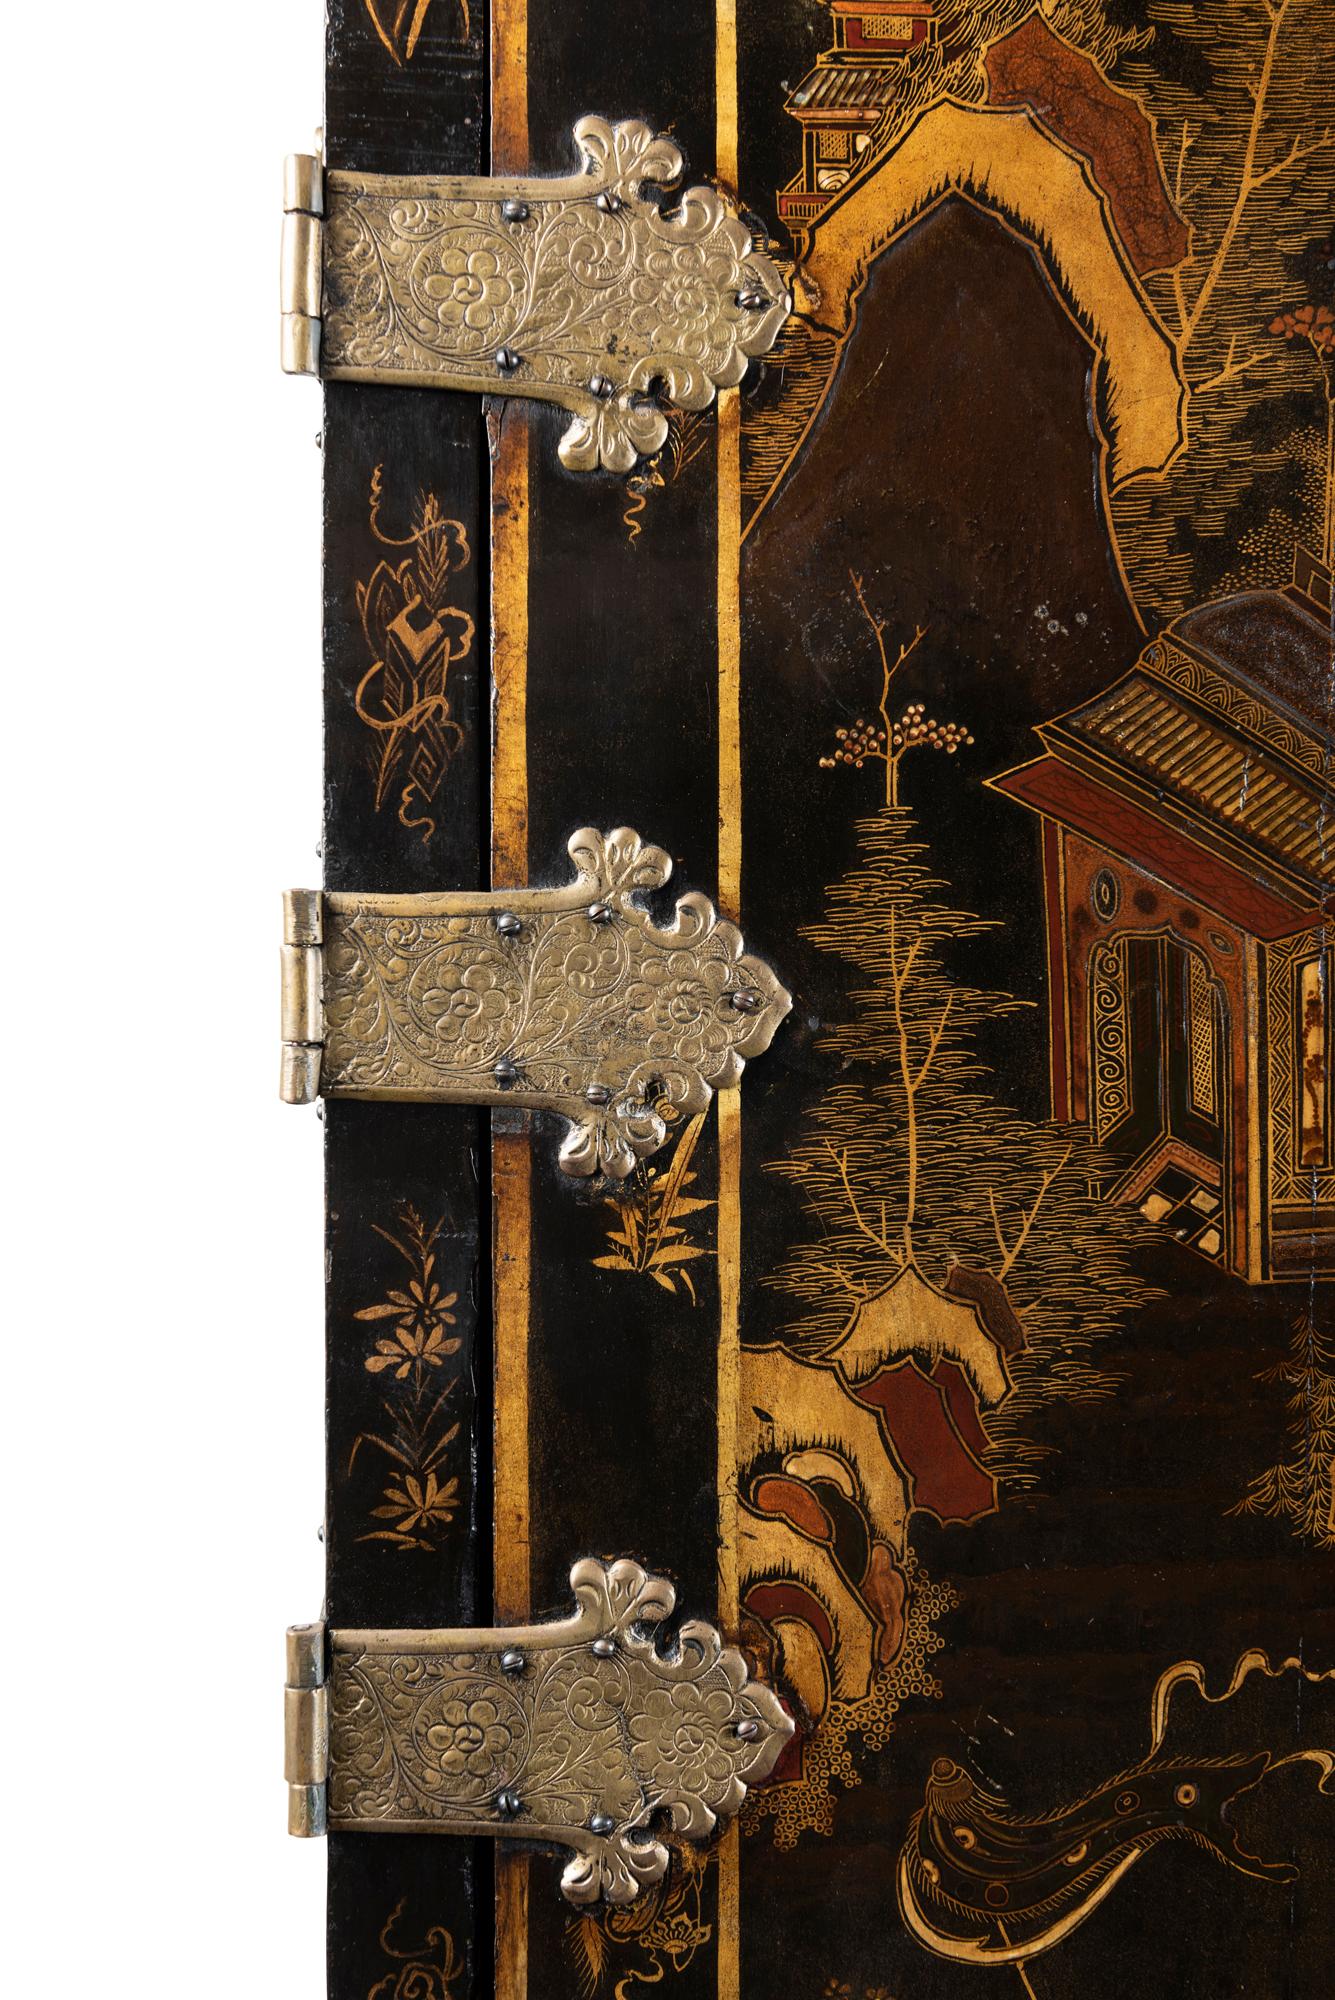 English A Late 18th to Early 19th Century Large Chinoiserie Black Lacquer Cabinet For Sale